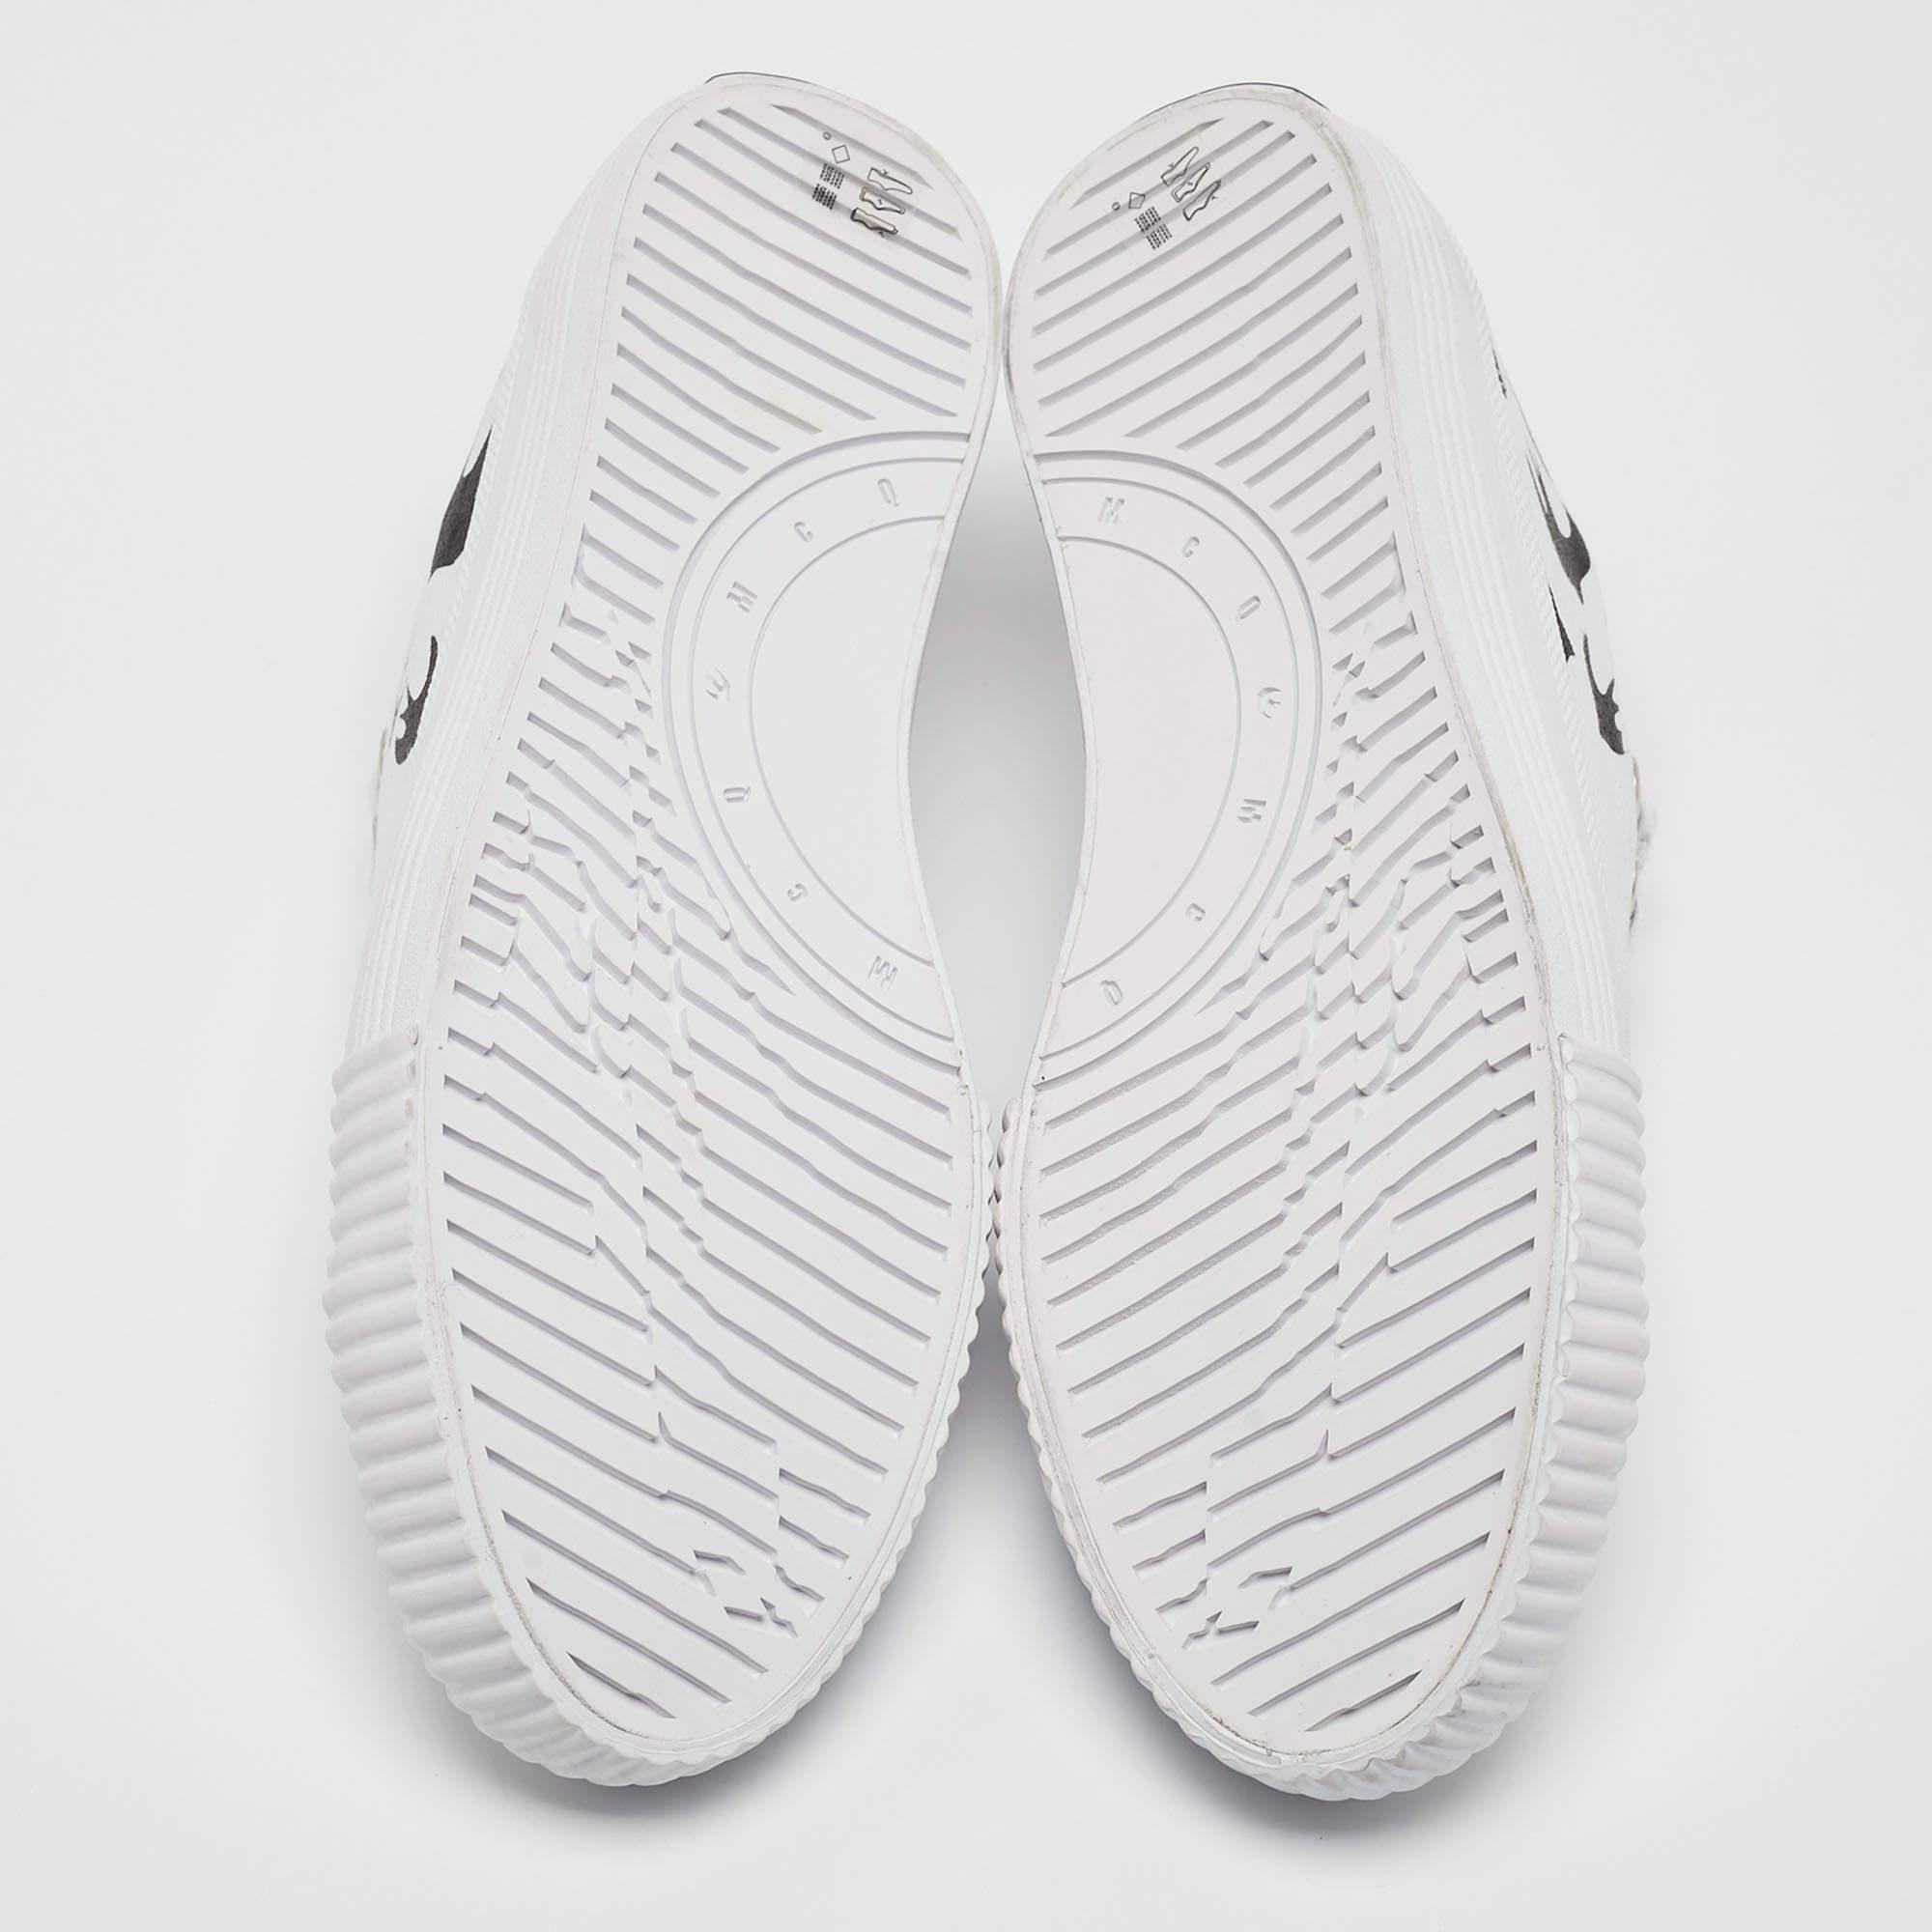 McQ by Alexander McQueen White/Black Canvas Shallow Swarm Sneakers Size 40 1